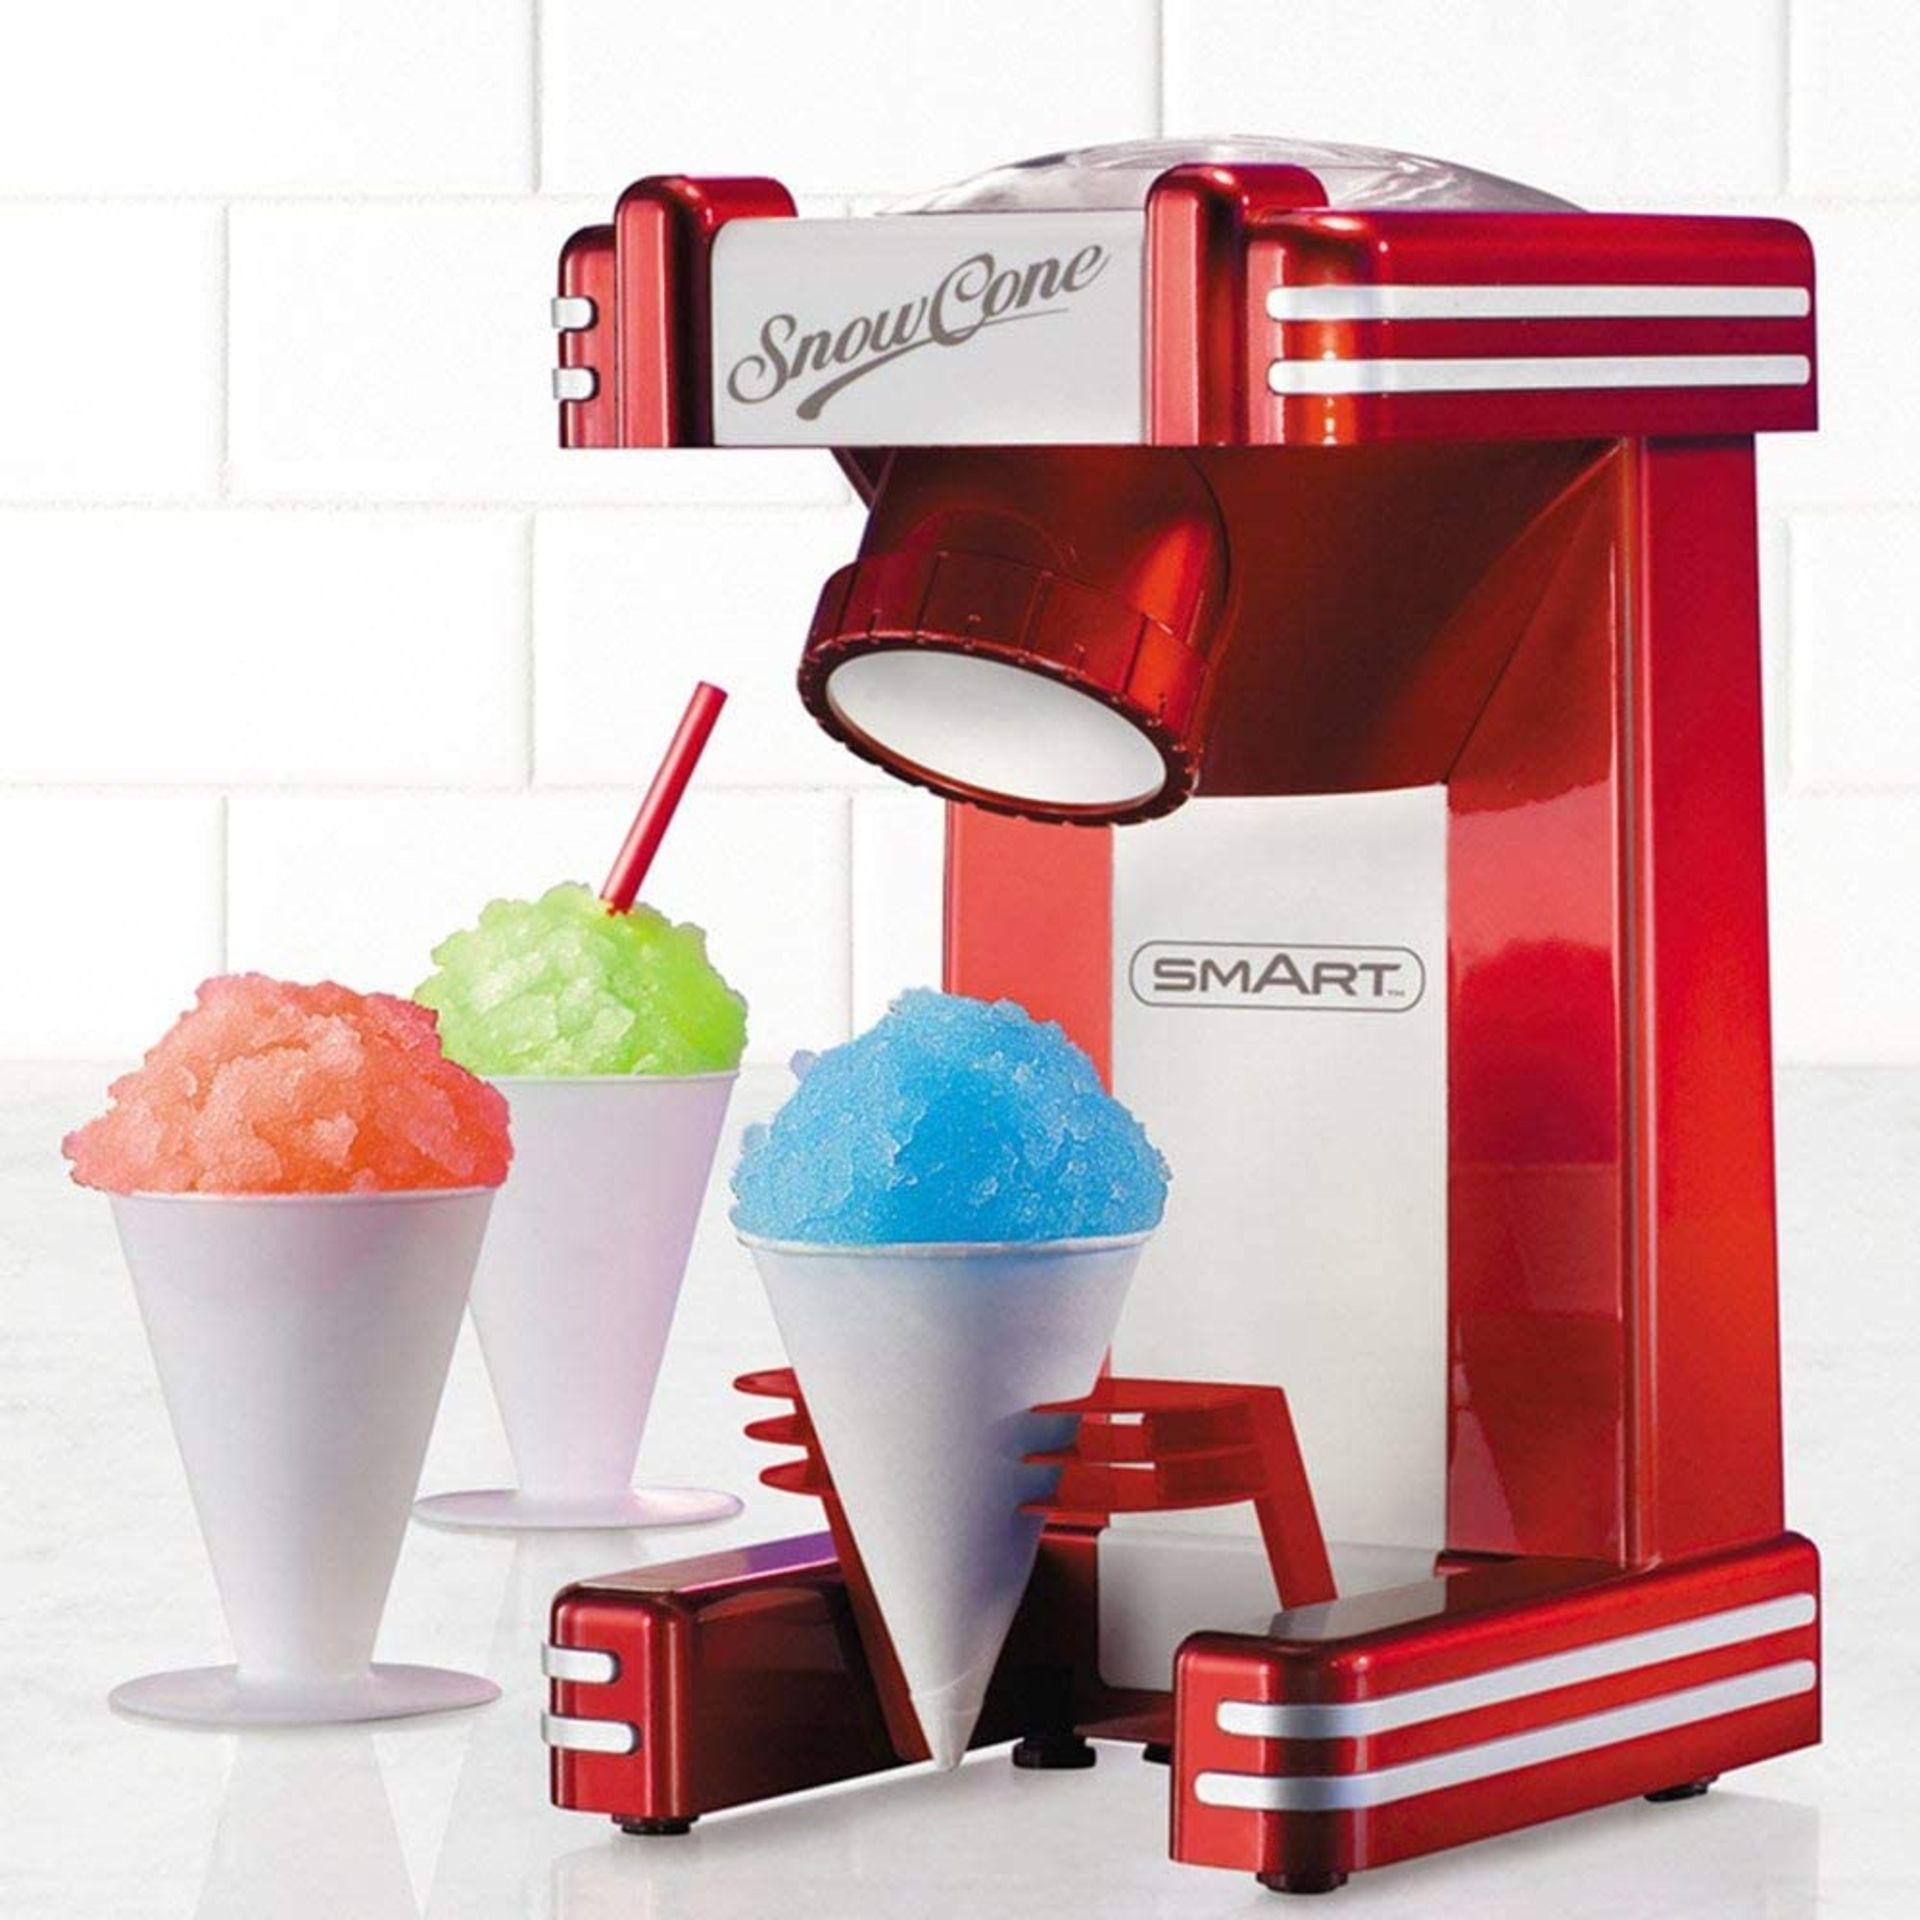 (R8) Lot RRP £177. 3x SMART Snow Cone Maker RRP £59 Each. (Units Have Return To Manufacturer Sticke